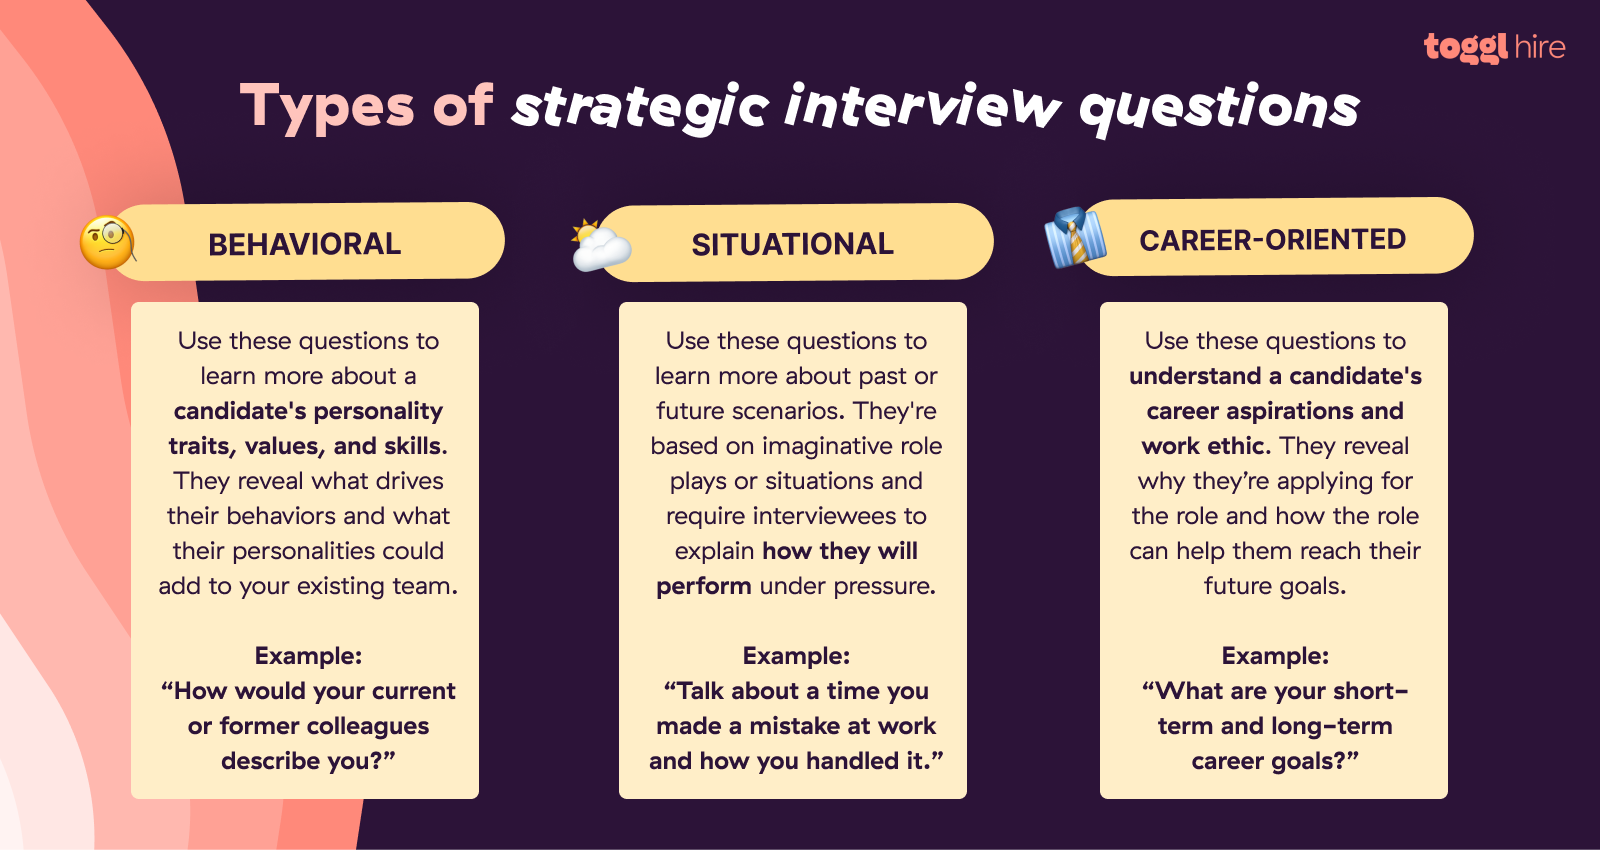 A brief overview of different types of strategic interview questions.